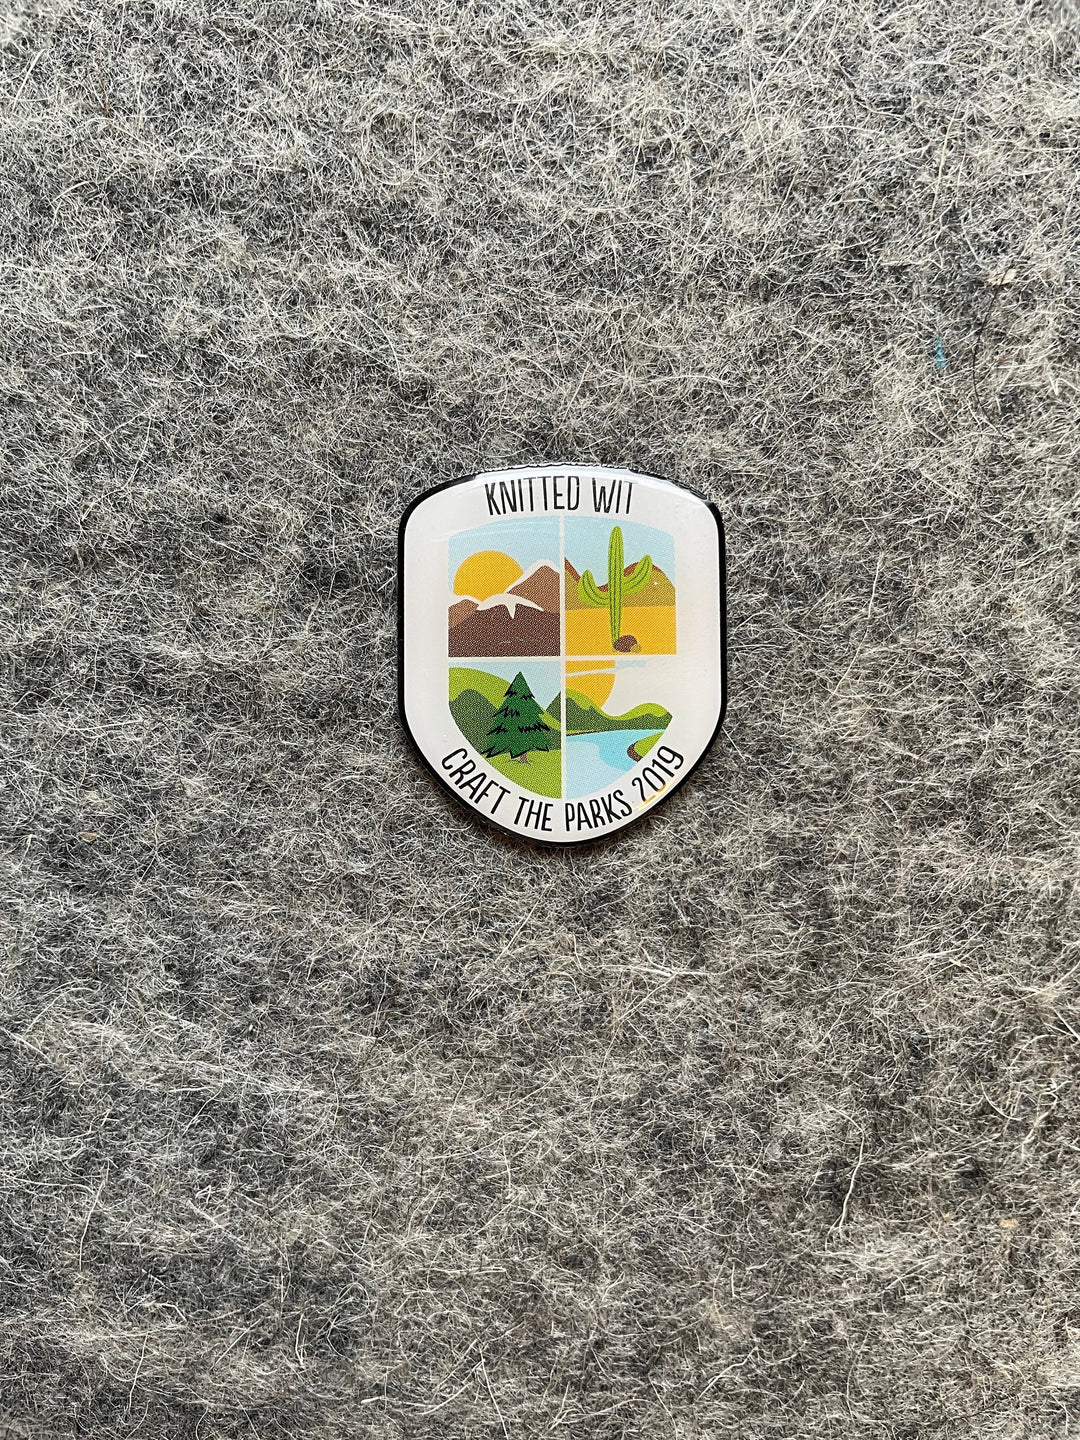 2019 Knitted Wit Craft the Parks Enamel Pin